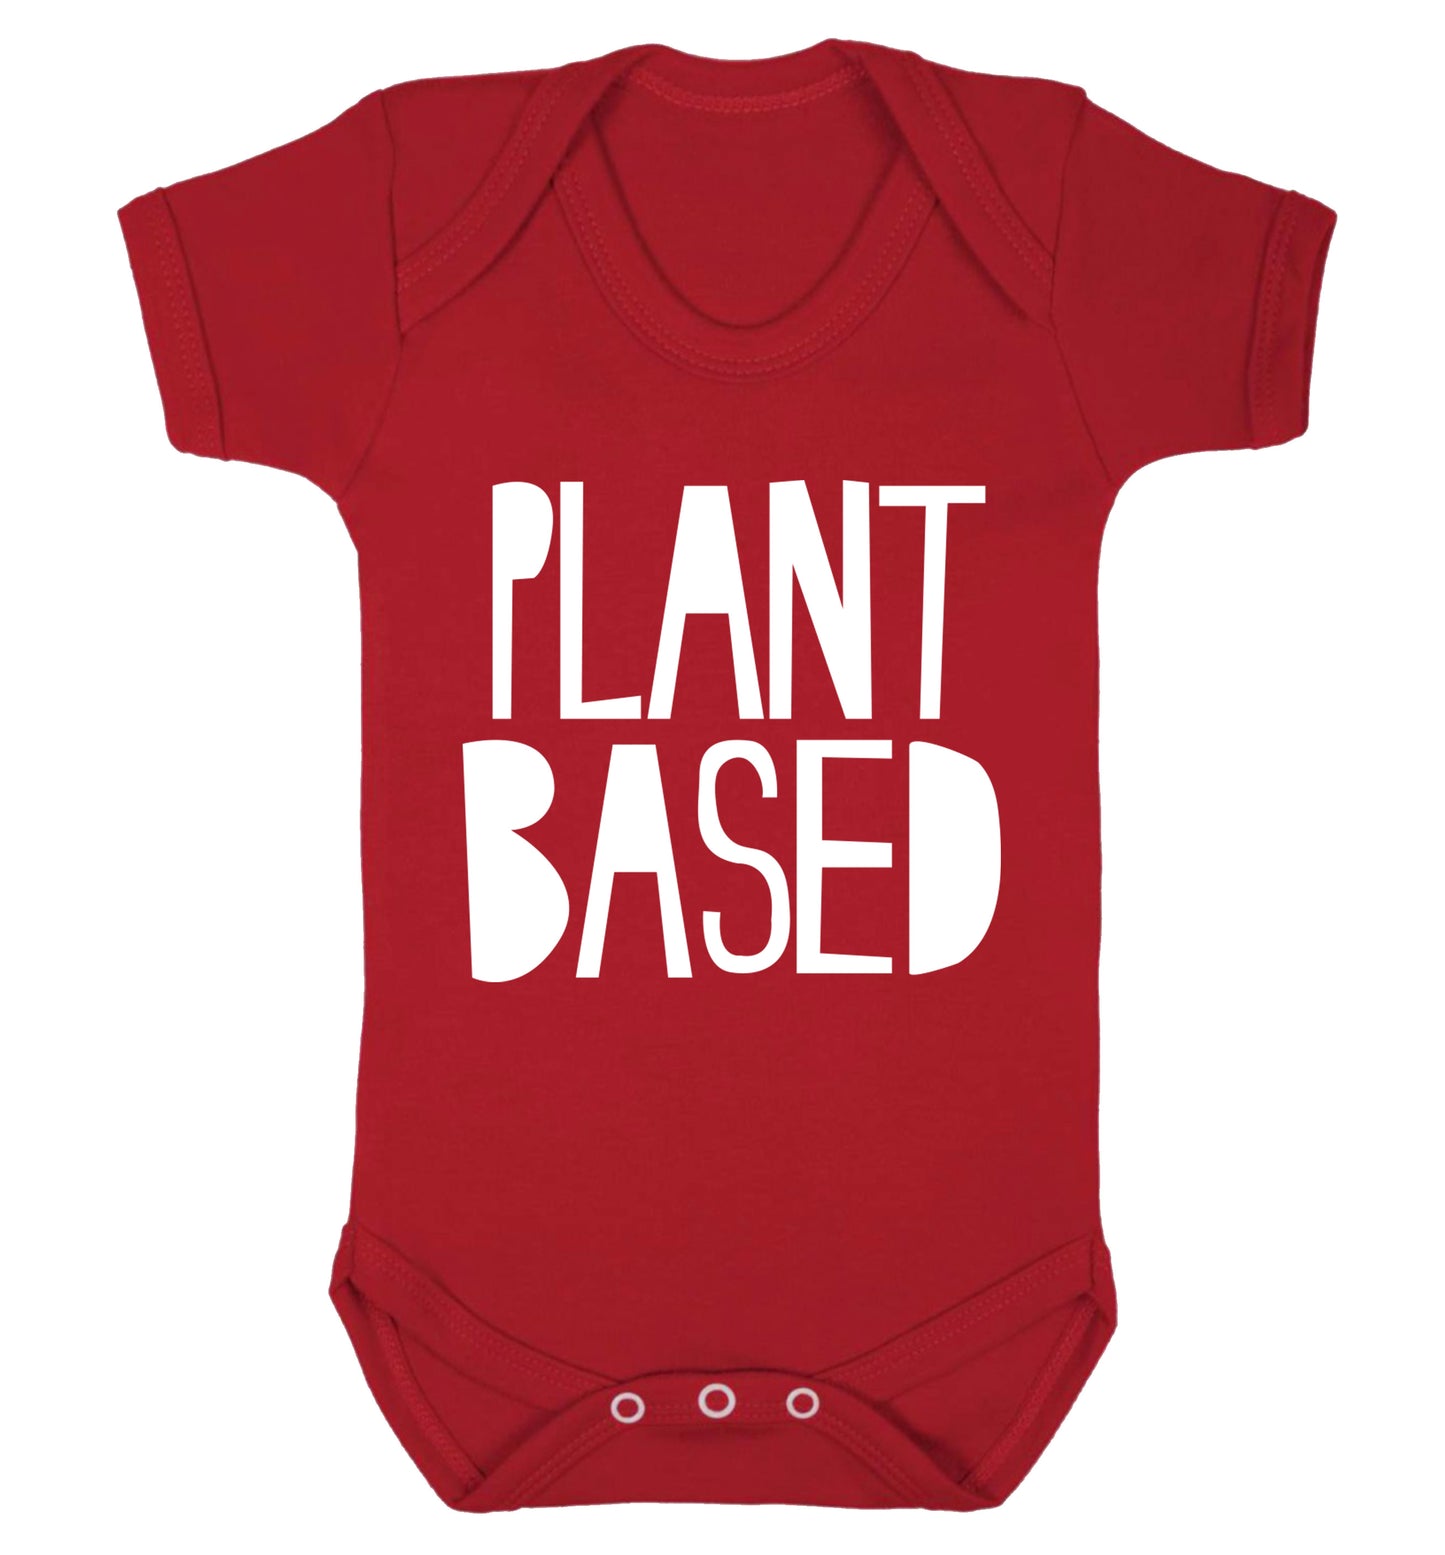 Plant Based Baby Vest red 18-24 months